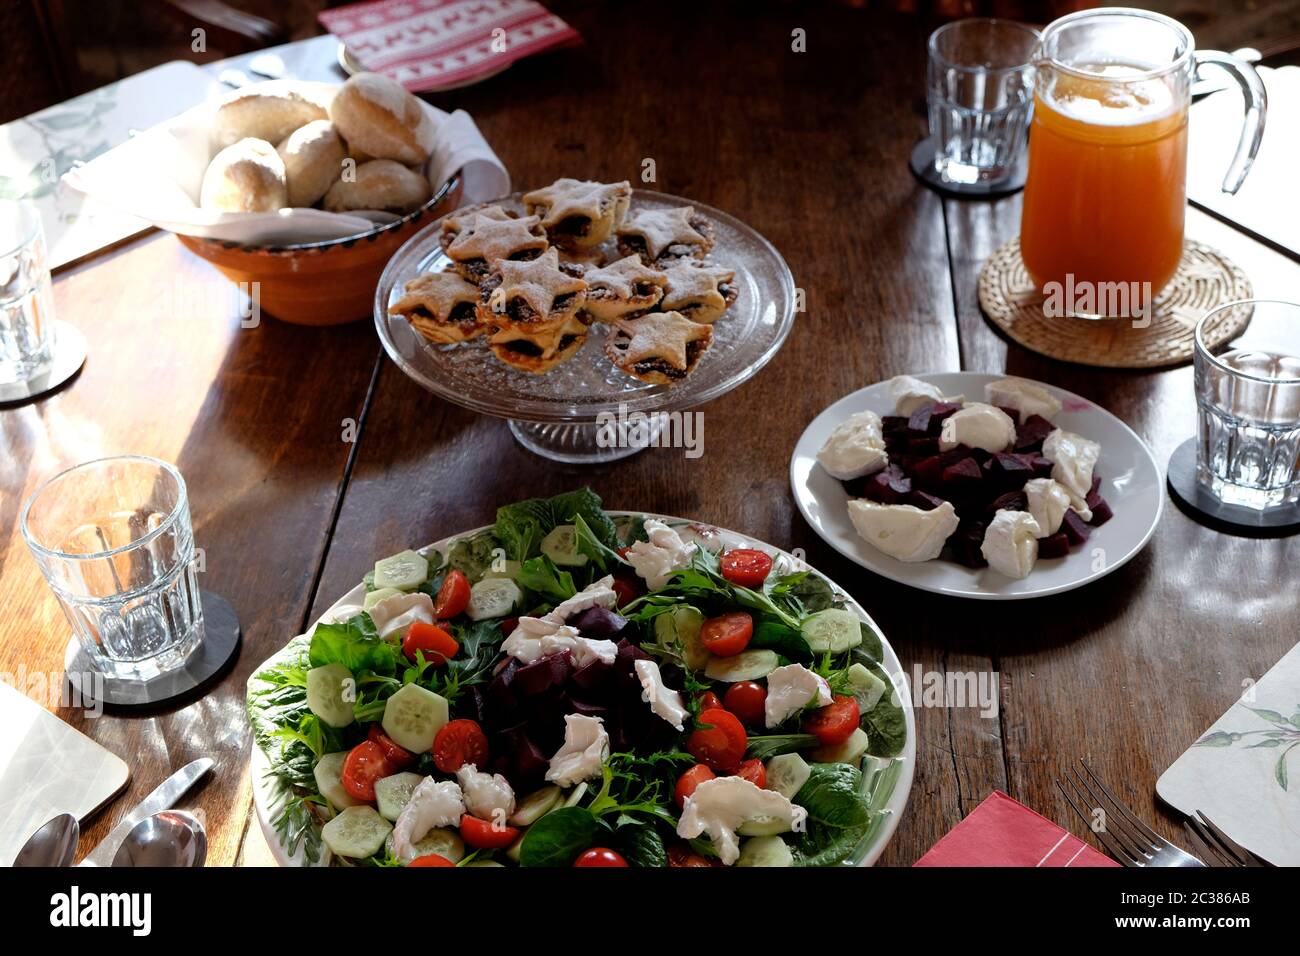 Healthy homemade lunch served on a sunny day in December Stock Photo